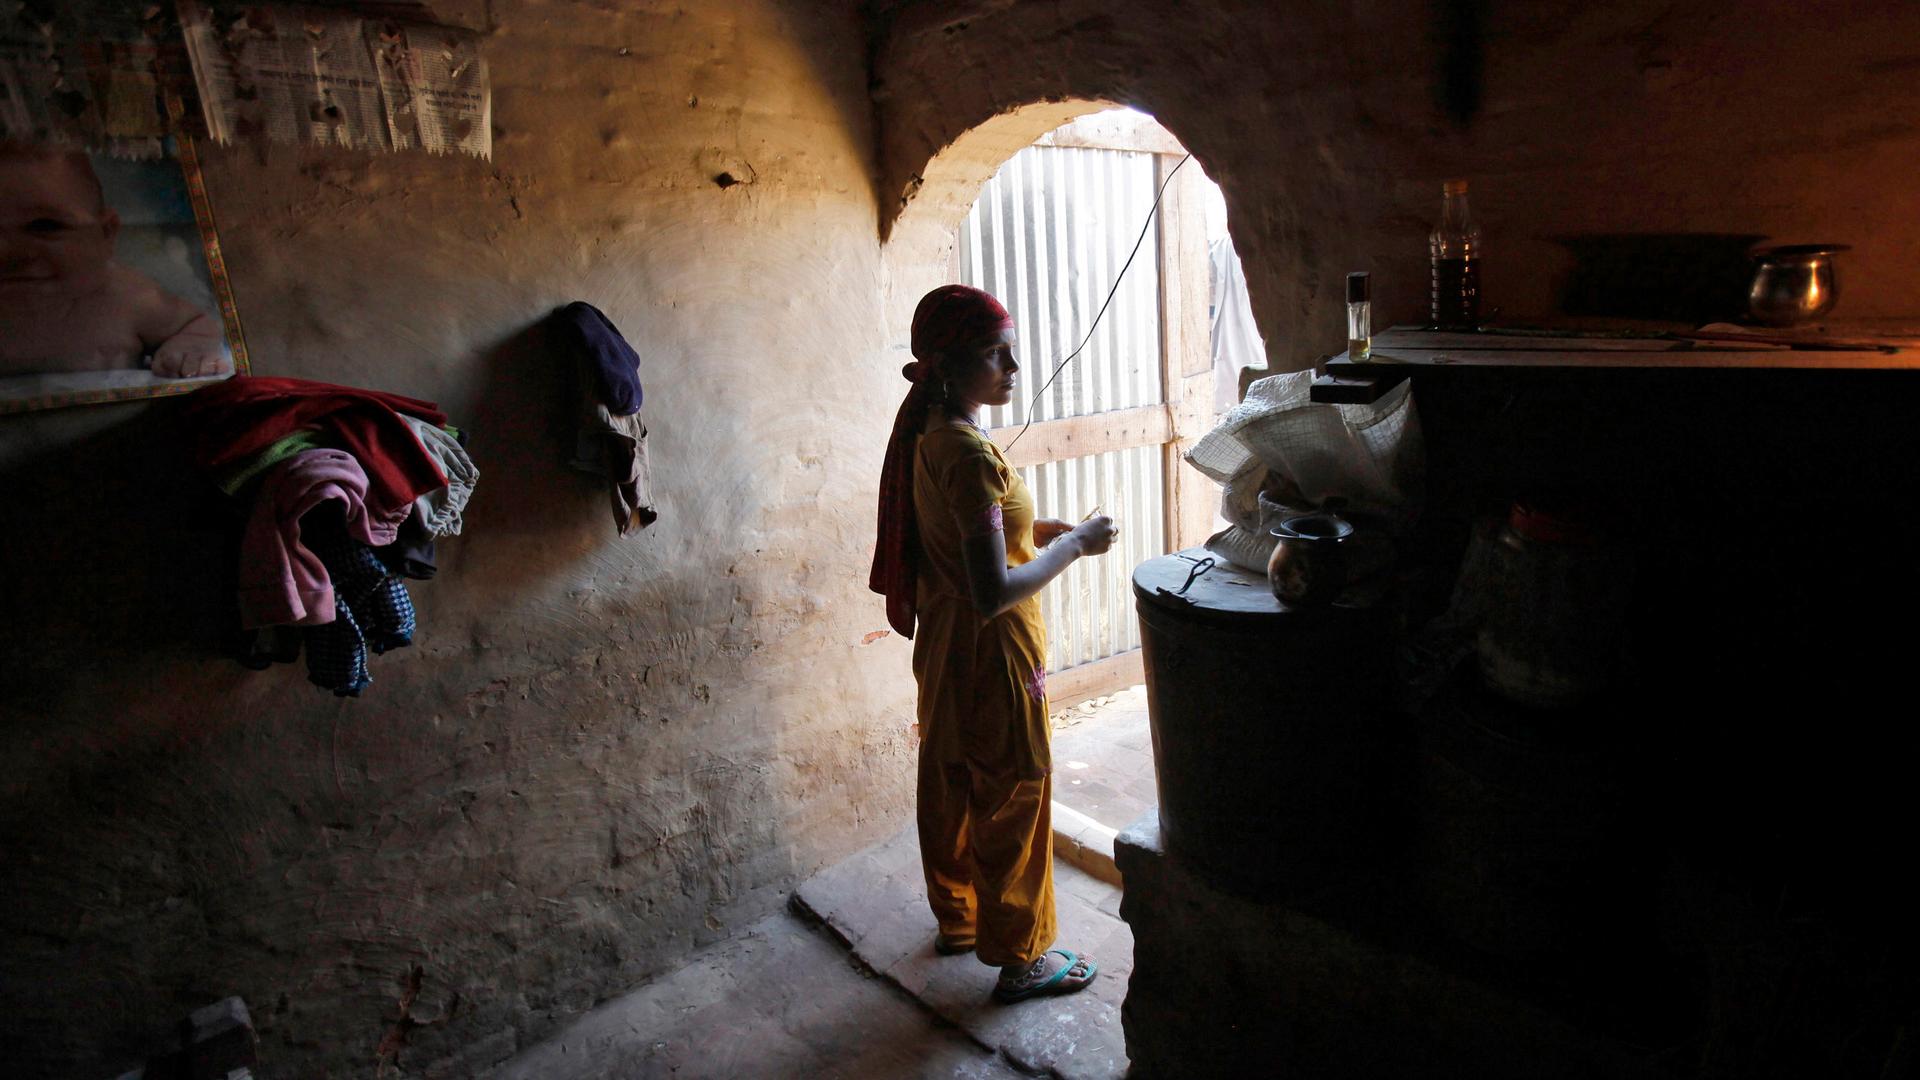 A woman laborer watches television inside her house at the compound of a brick factory at Libbar Hari in the northern Indian state of Uttarakhand.